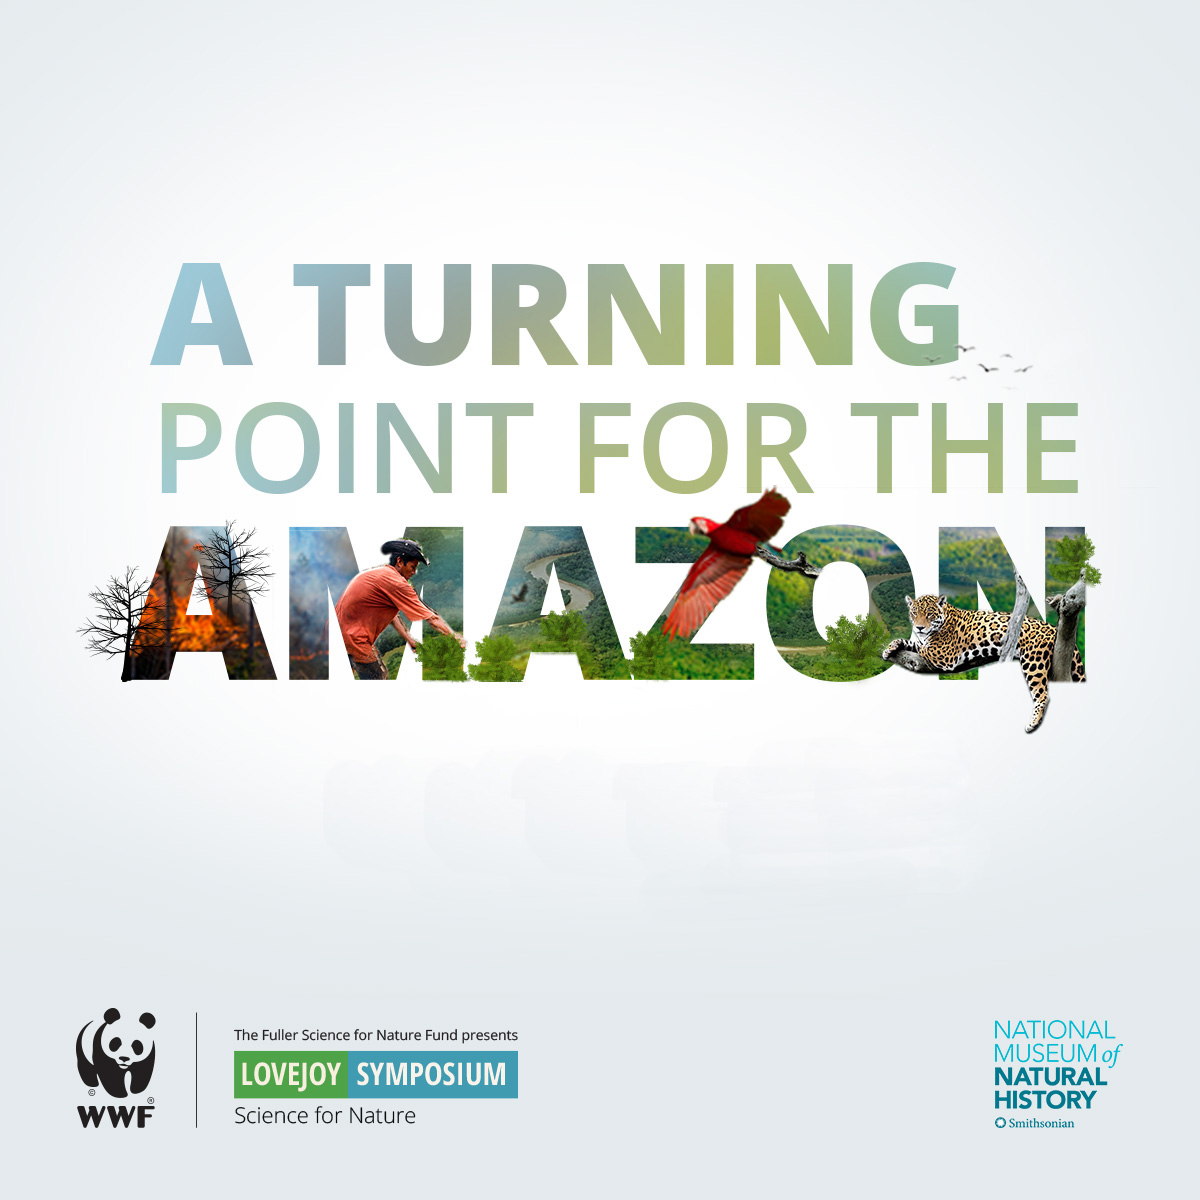 Join SPA Co-chair Marielos Peña-Claros and SPA Lead Author Mariana Varese discussing science in and for the Amazon!
Tune into the #WWFLovejoy Symposium, tomorrow October 24.
Register here: bit.ly/3LeXEux

#TheAmazonWeWant